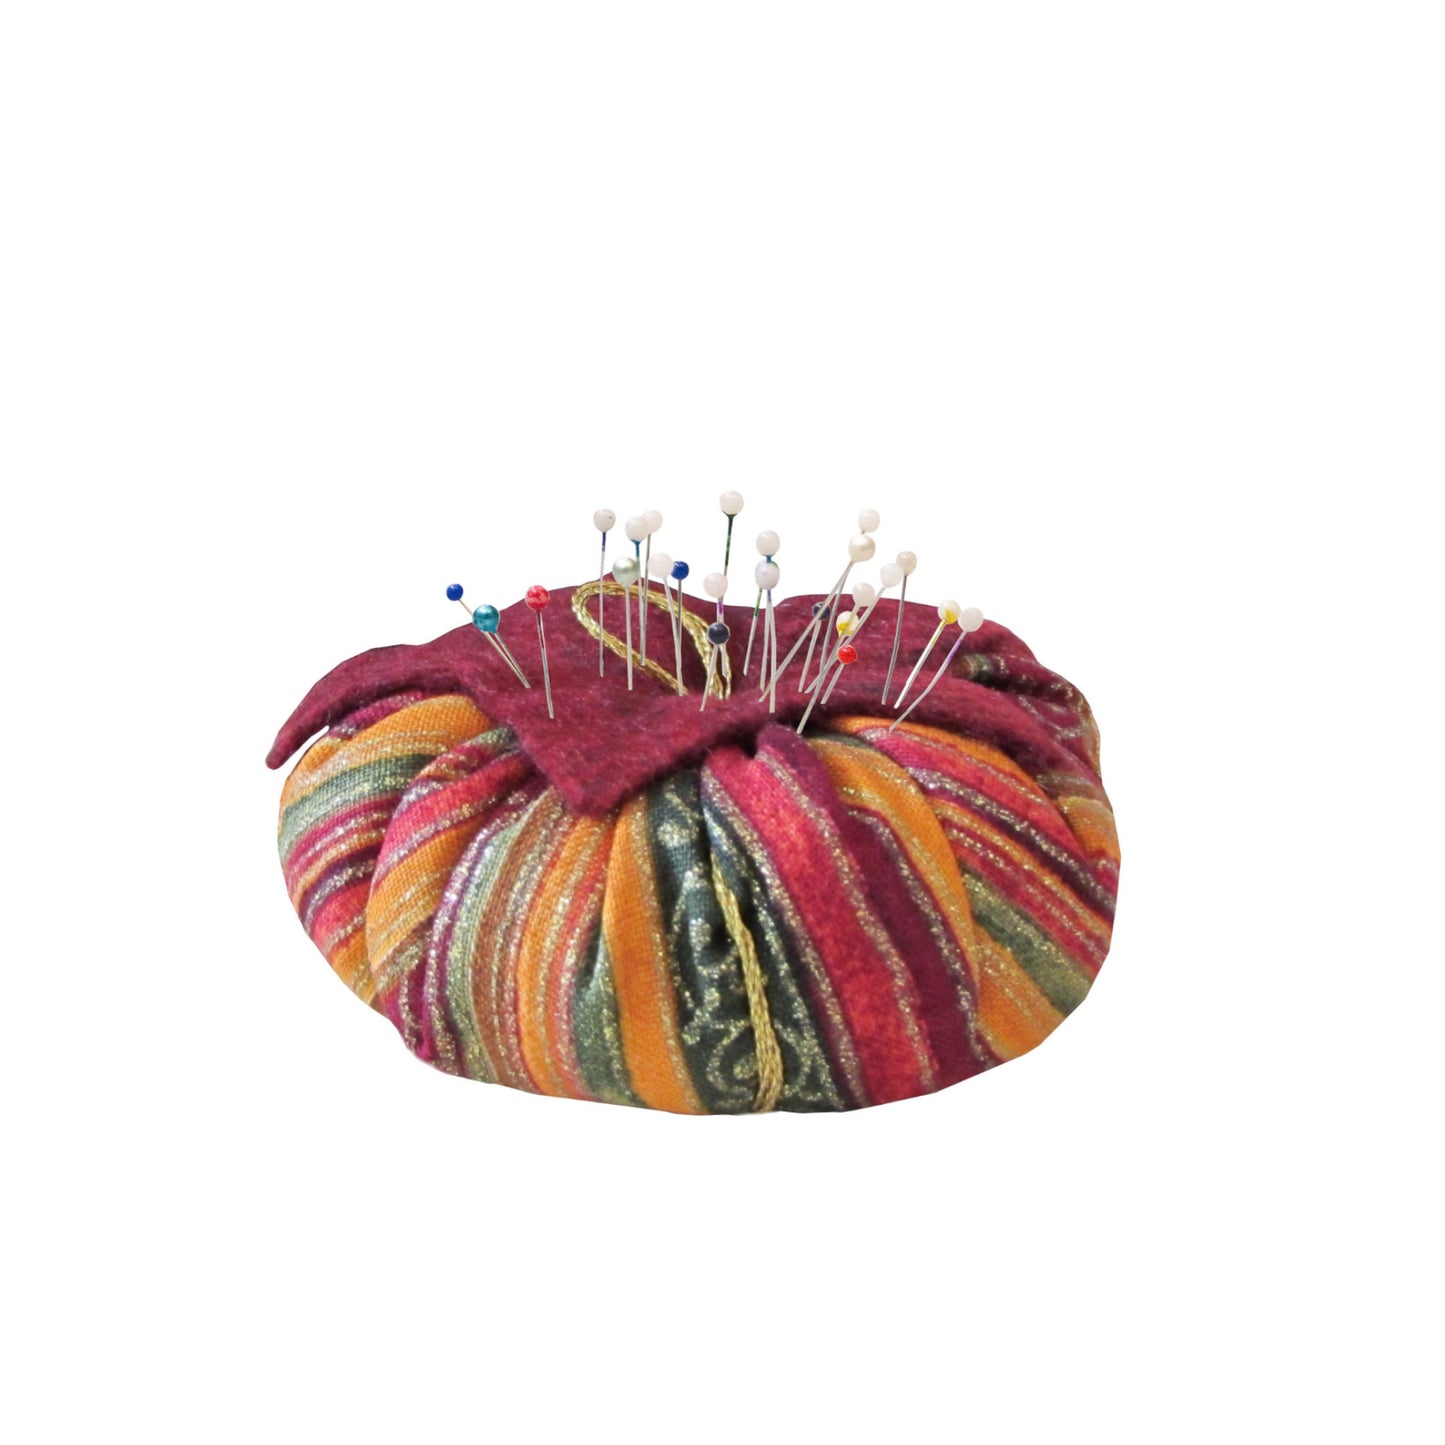 Burgundy Top Gold and Burgundy Striped Print Tomato Pincushion with pins